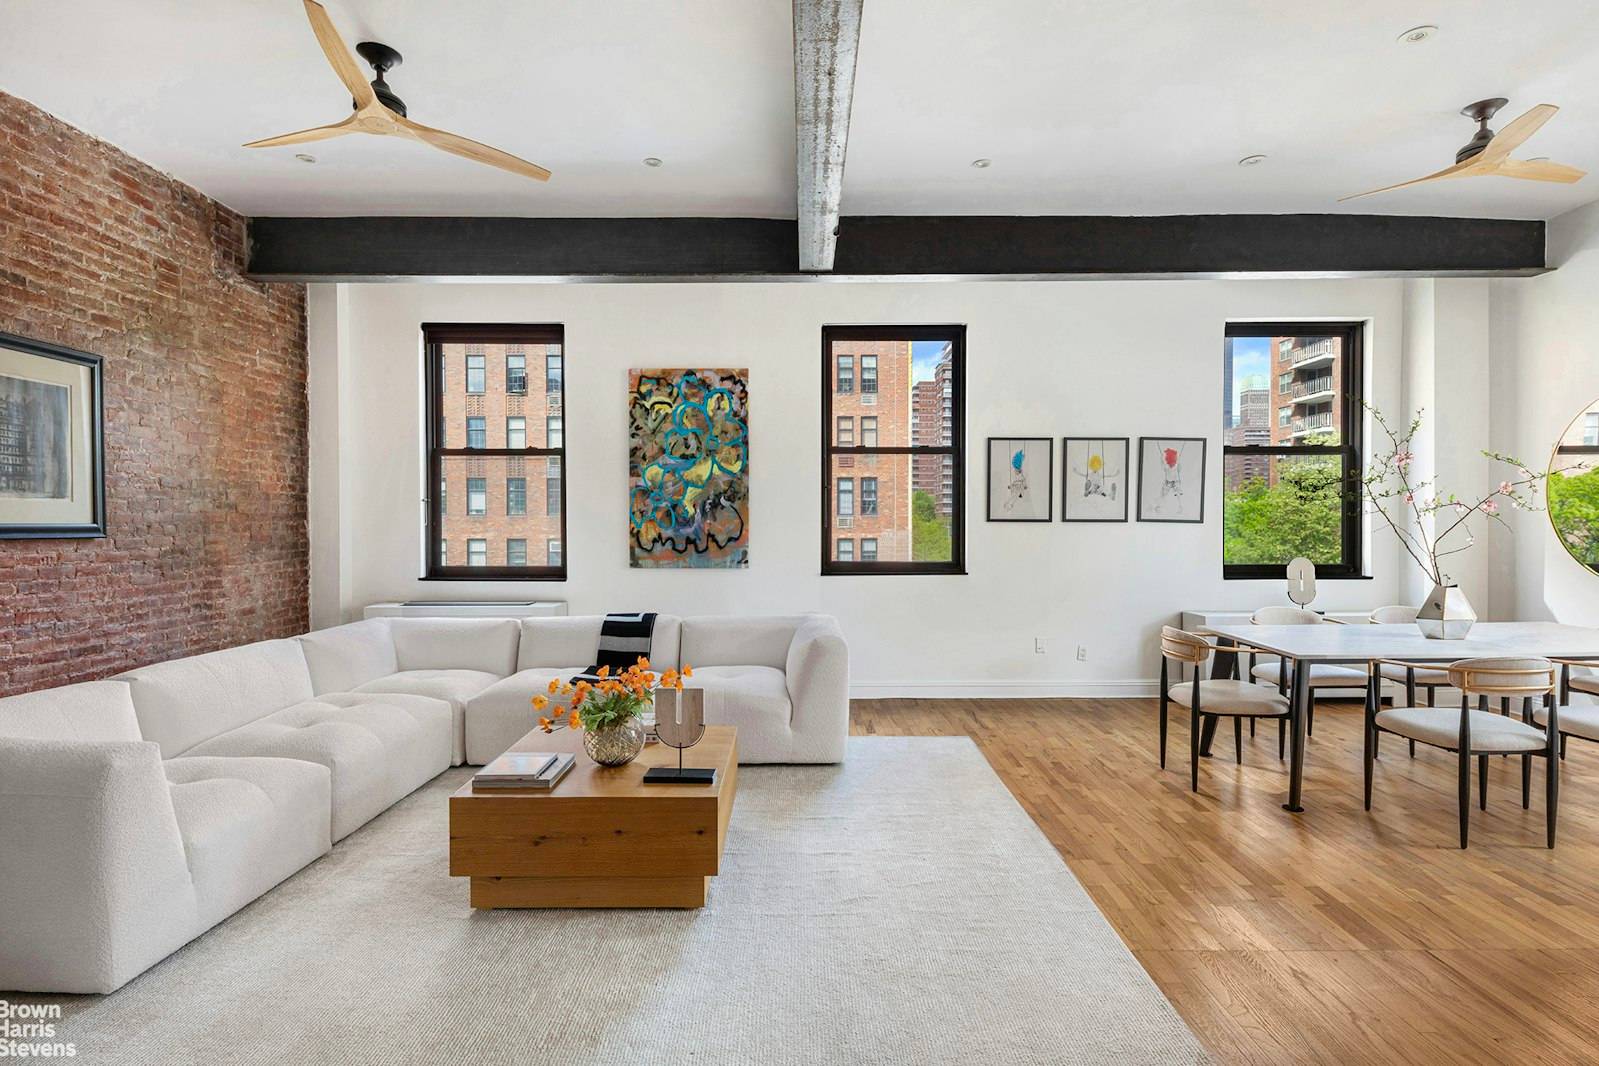 Extraordinary. This duplex loft in Chelsea will simply take your breath away.